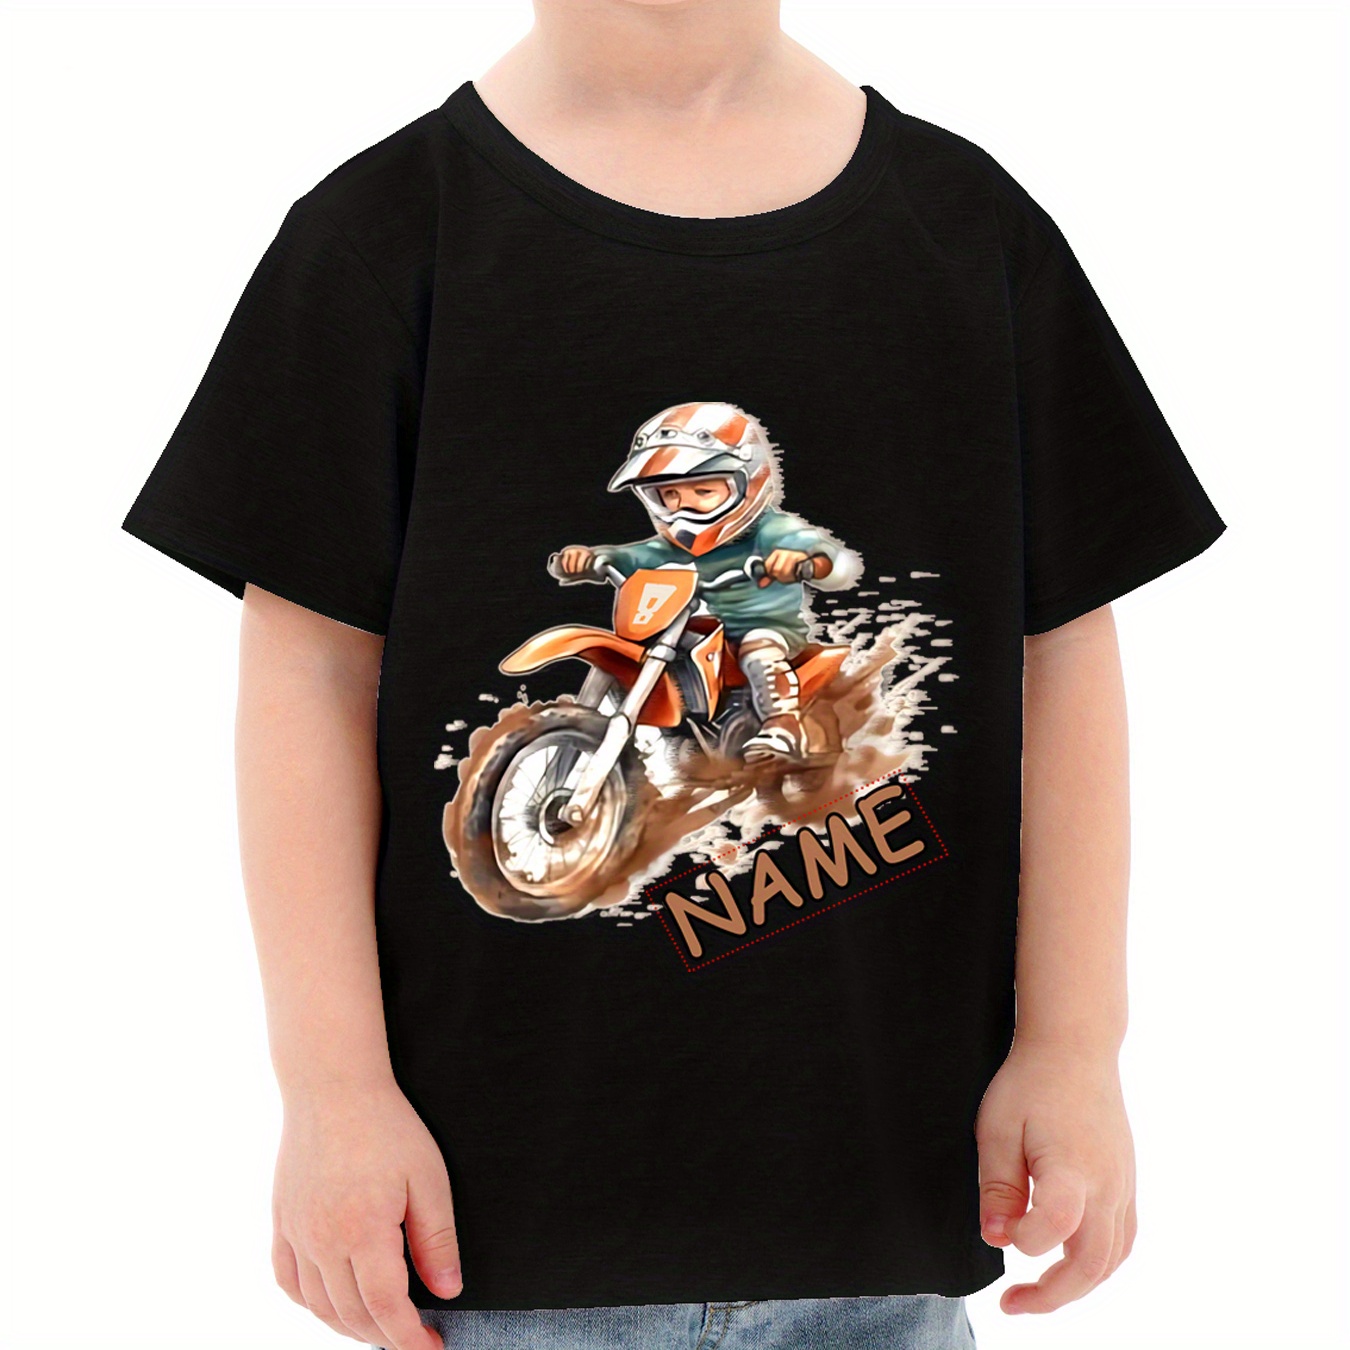 

Cute Cartoon Motorcycle Driver Print T-shirt- Engaging Visuals, Casual Short Sleeve T-shirts For Boys - Cool, Lightweight And Comfy Summer Clothes! Boy's Personalized Clothing